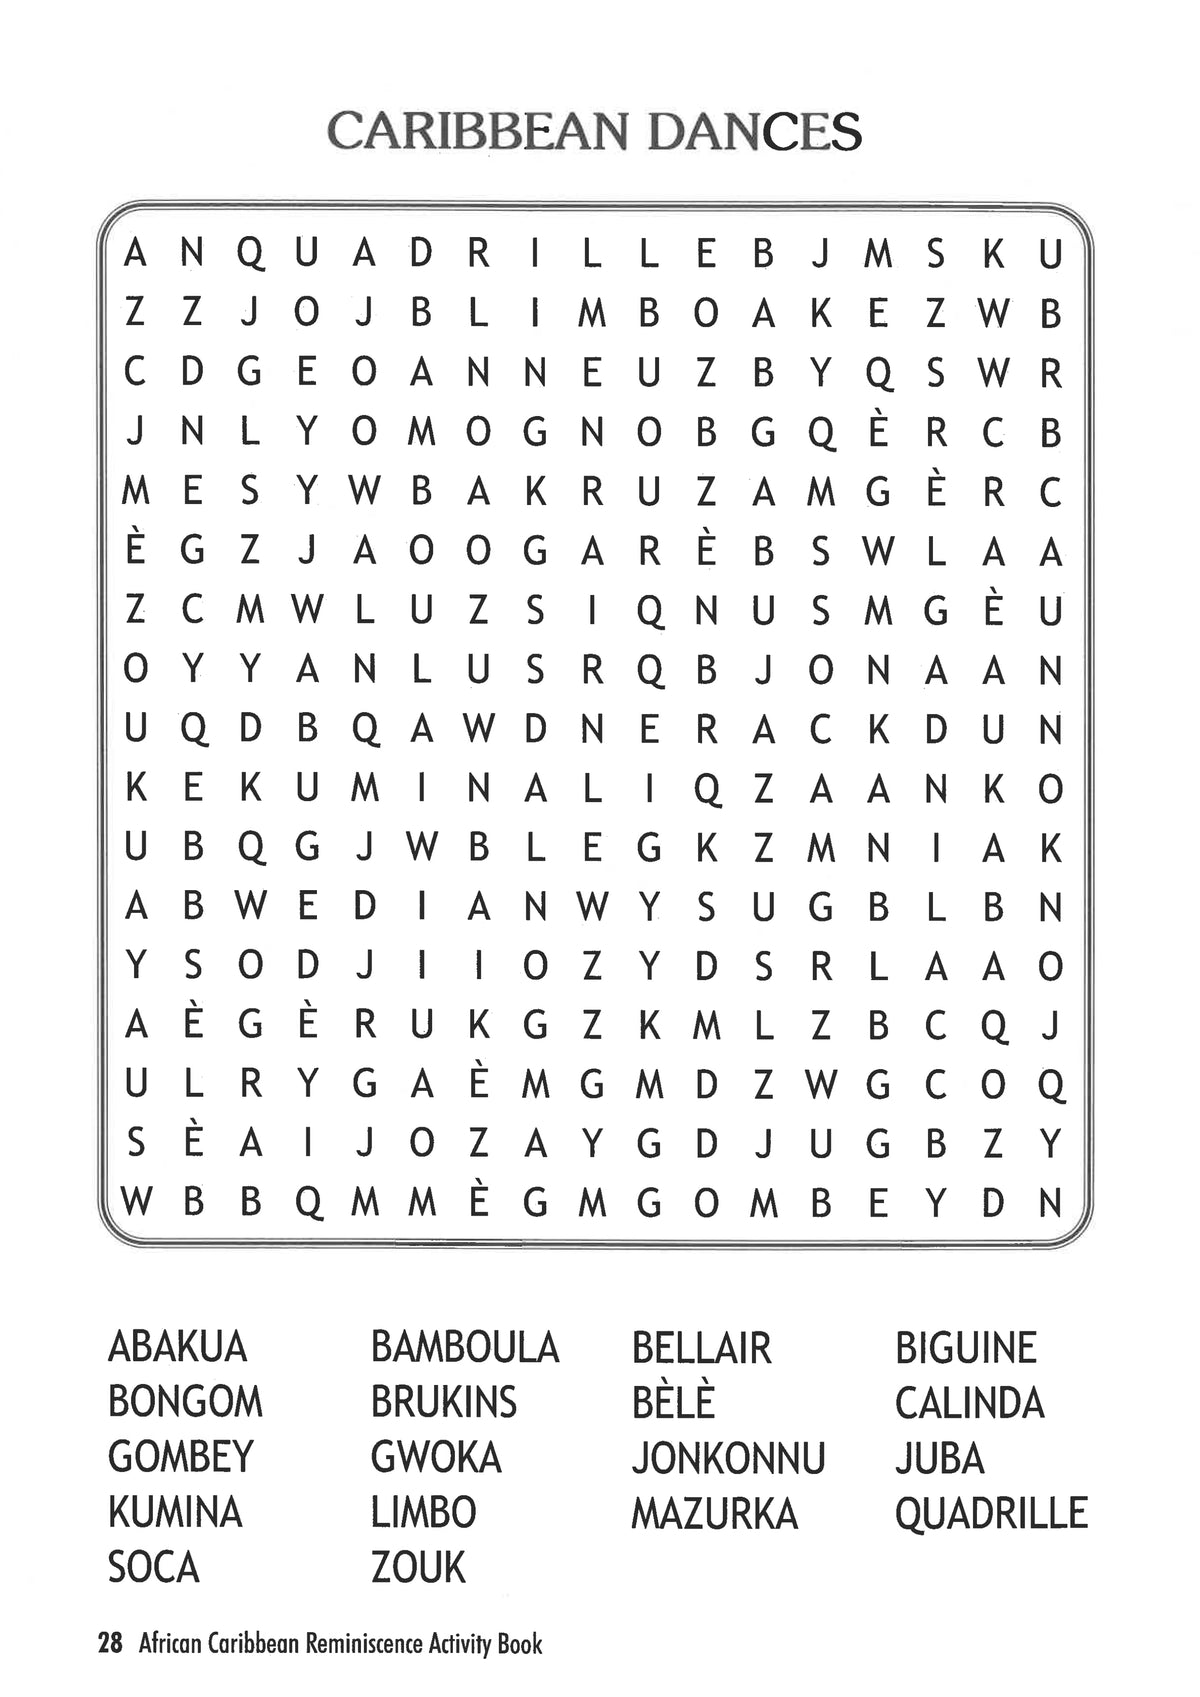 Wordsearch for Caribbean dances such as Quadrille and Gombey